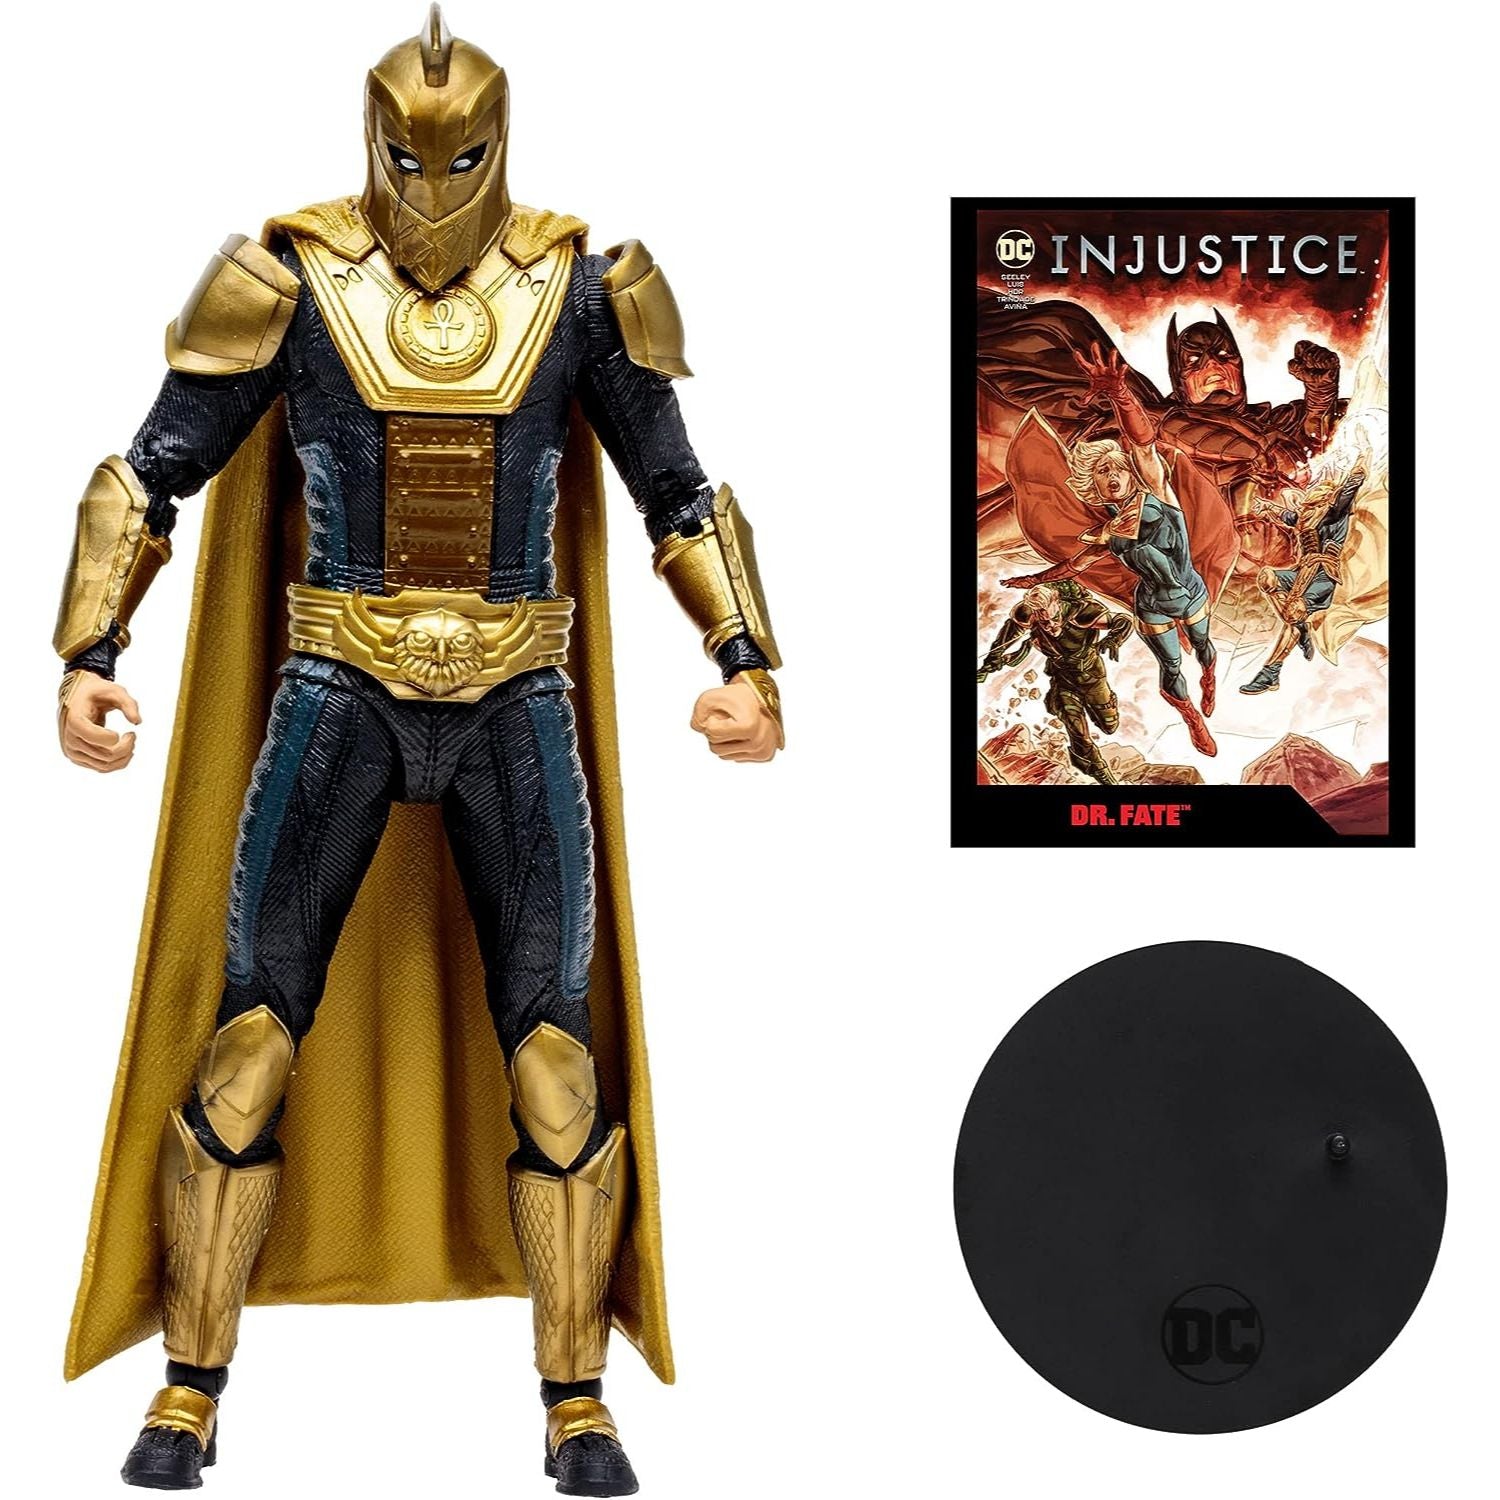 Injustice 2 - DR. Fate Action Figure Toy with accessories - Heretoserveyou